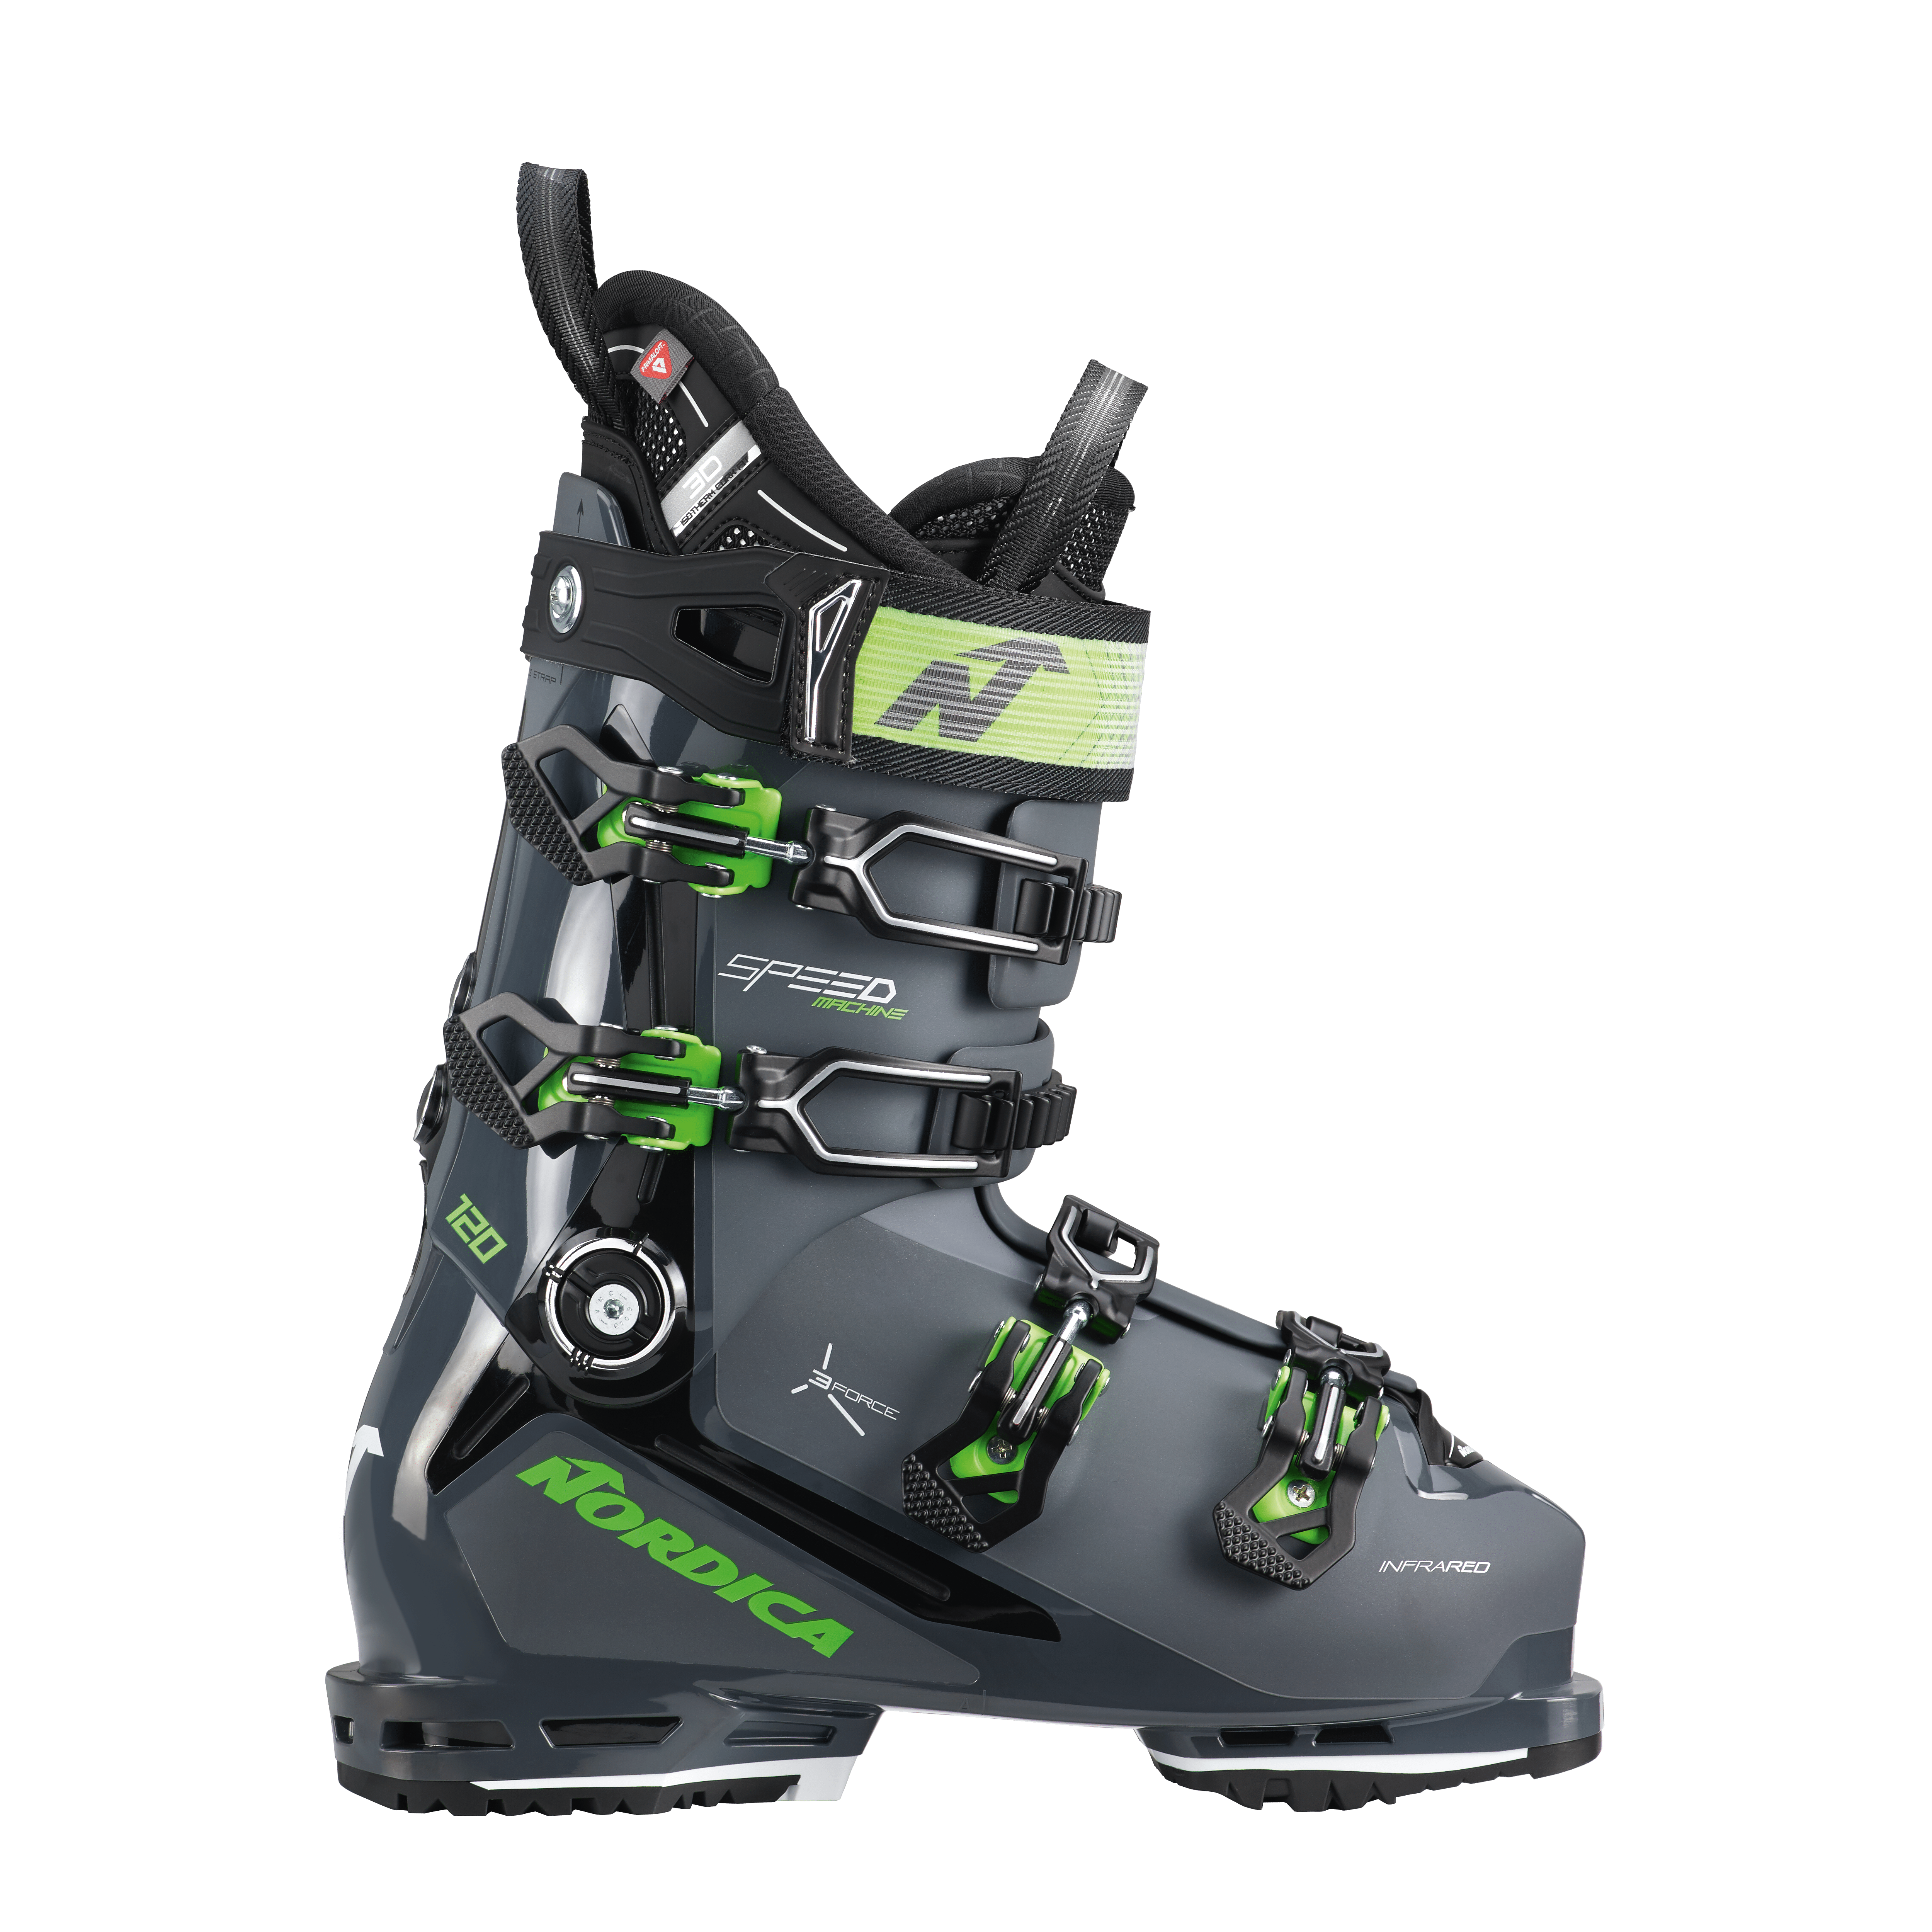 Sportmachine 3 120 (GW) - Nordica - Skis and Boots – Official website